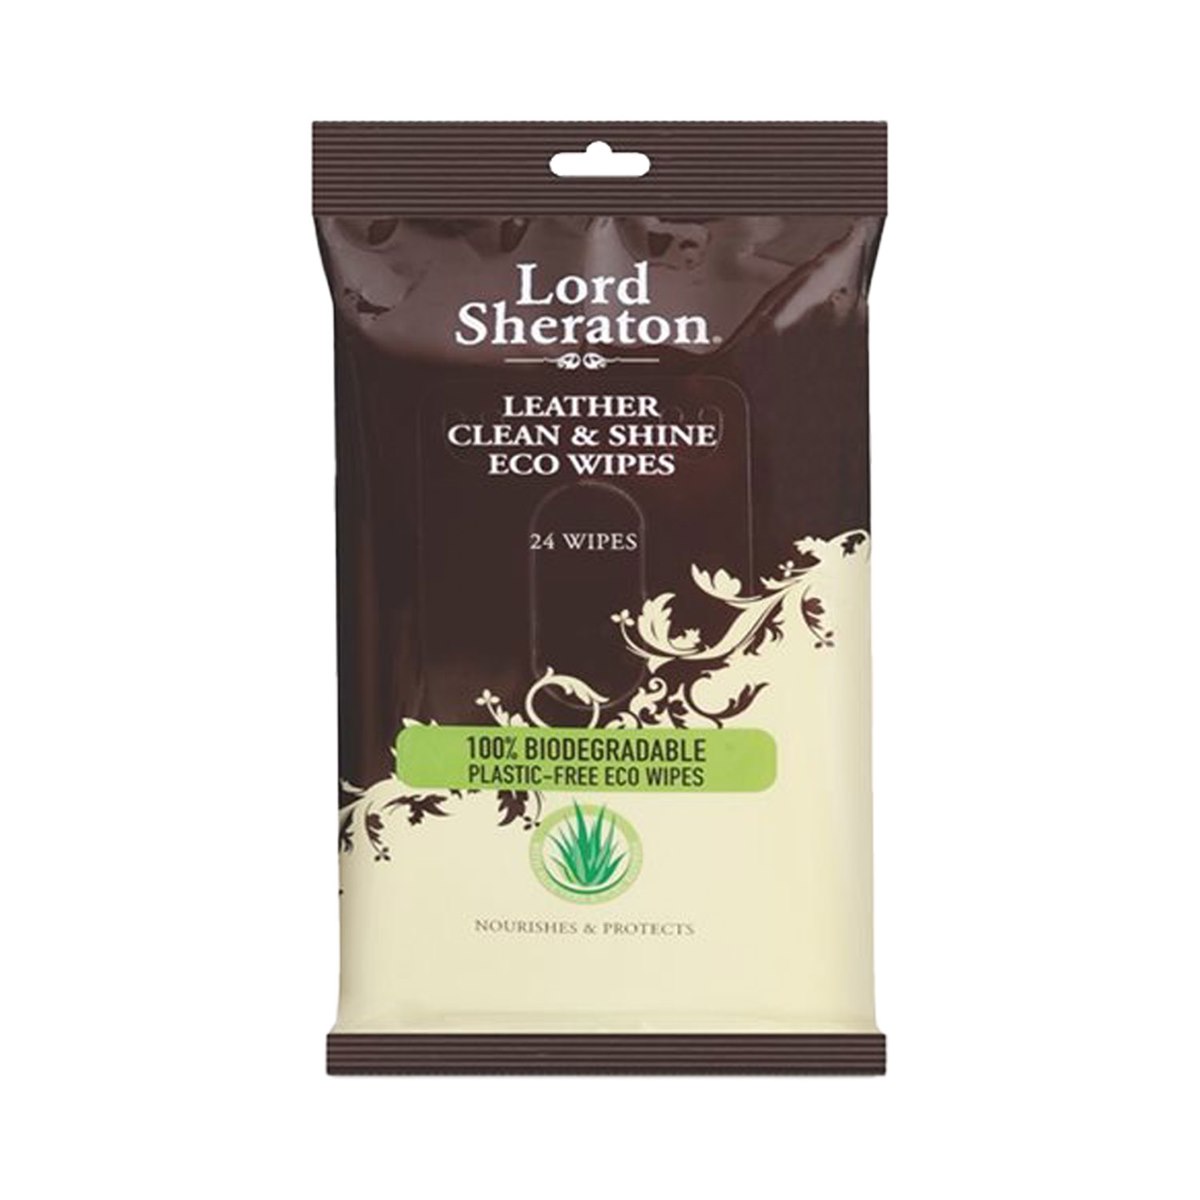 Lord Sheraton Leather Clean and Shine Eco Wipes